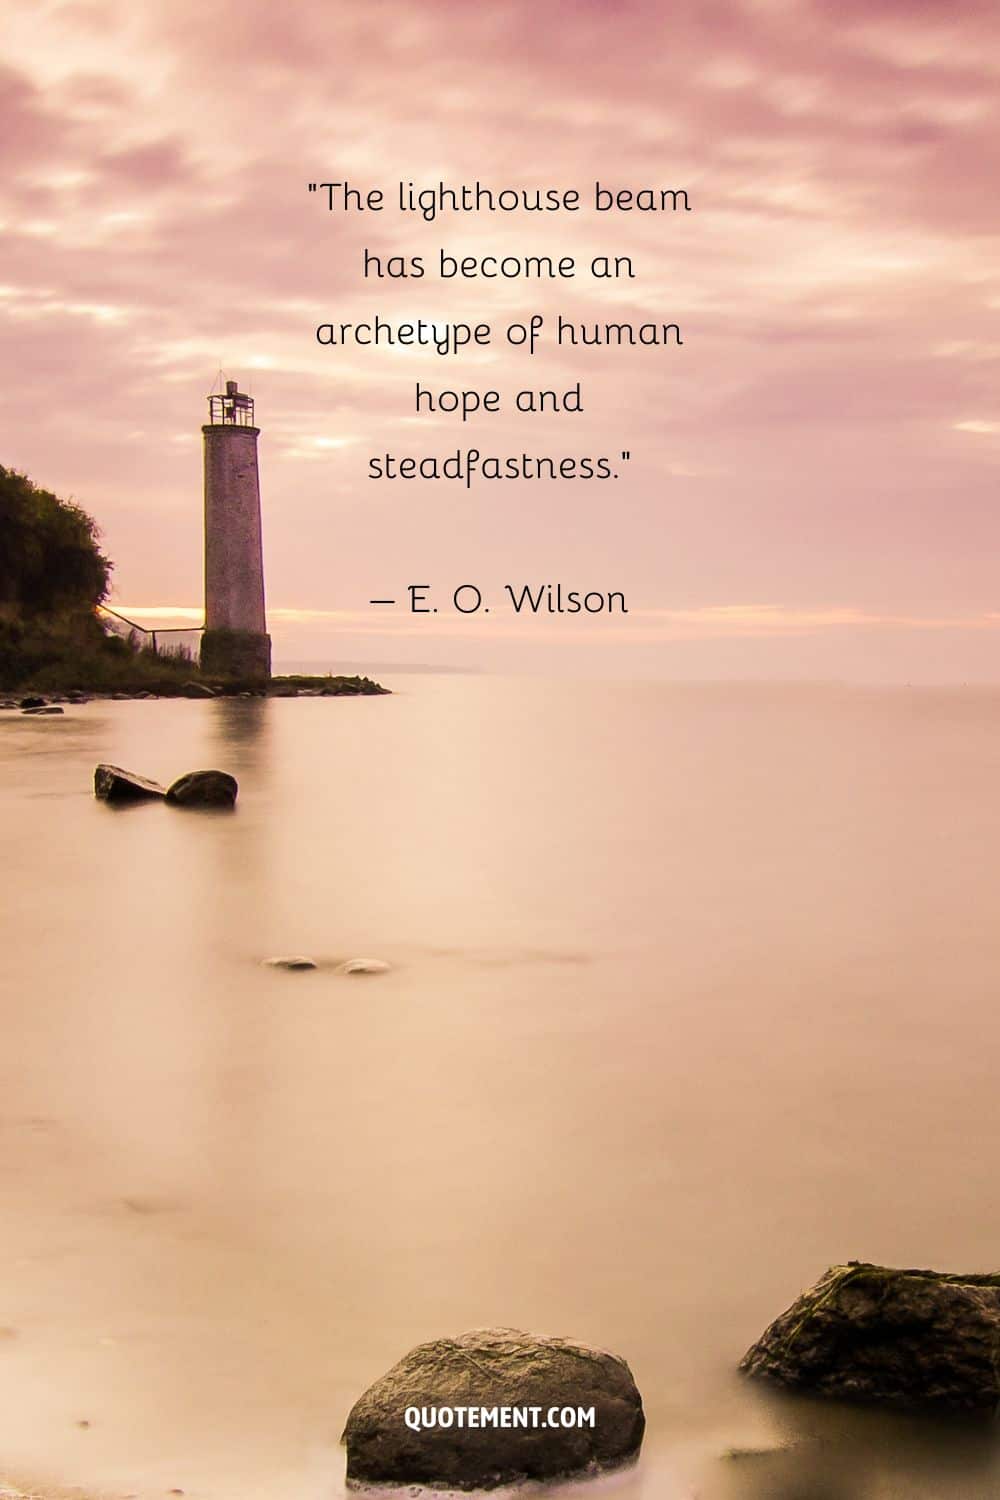 Mind-blowing quote by E. O. Wilson and a lighthouse in the background